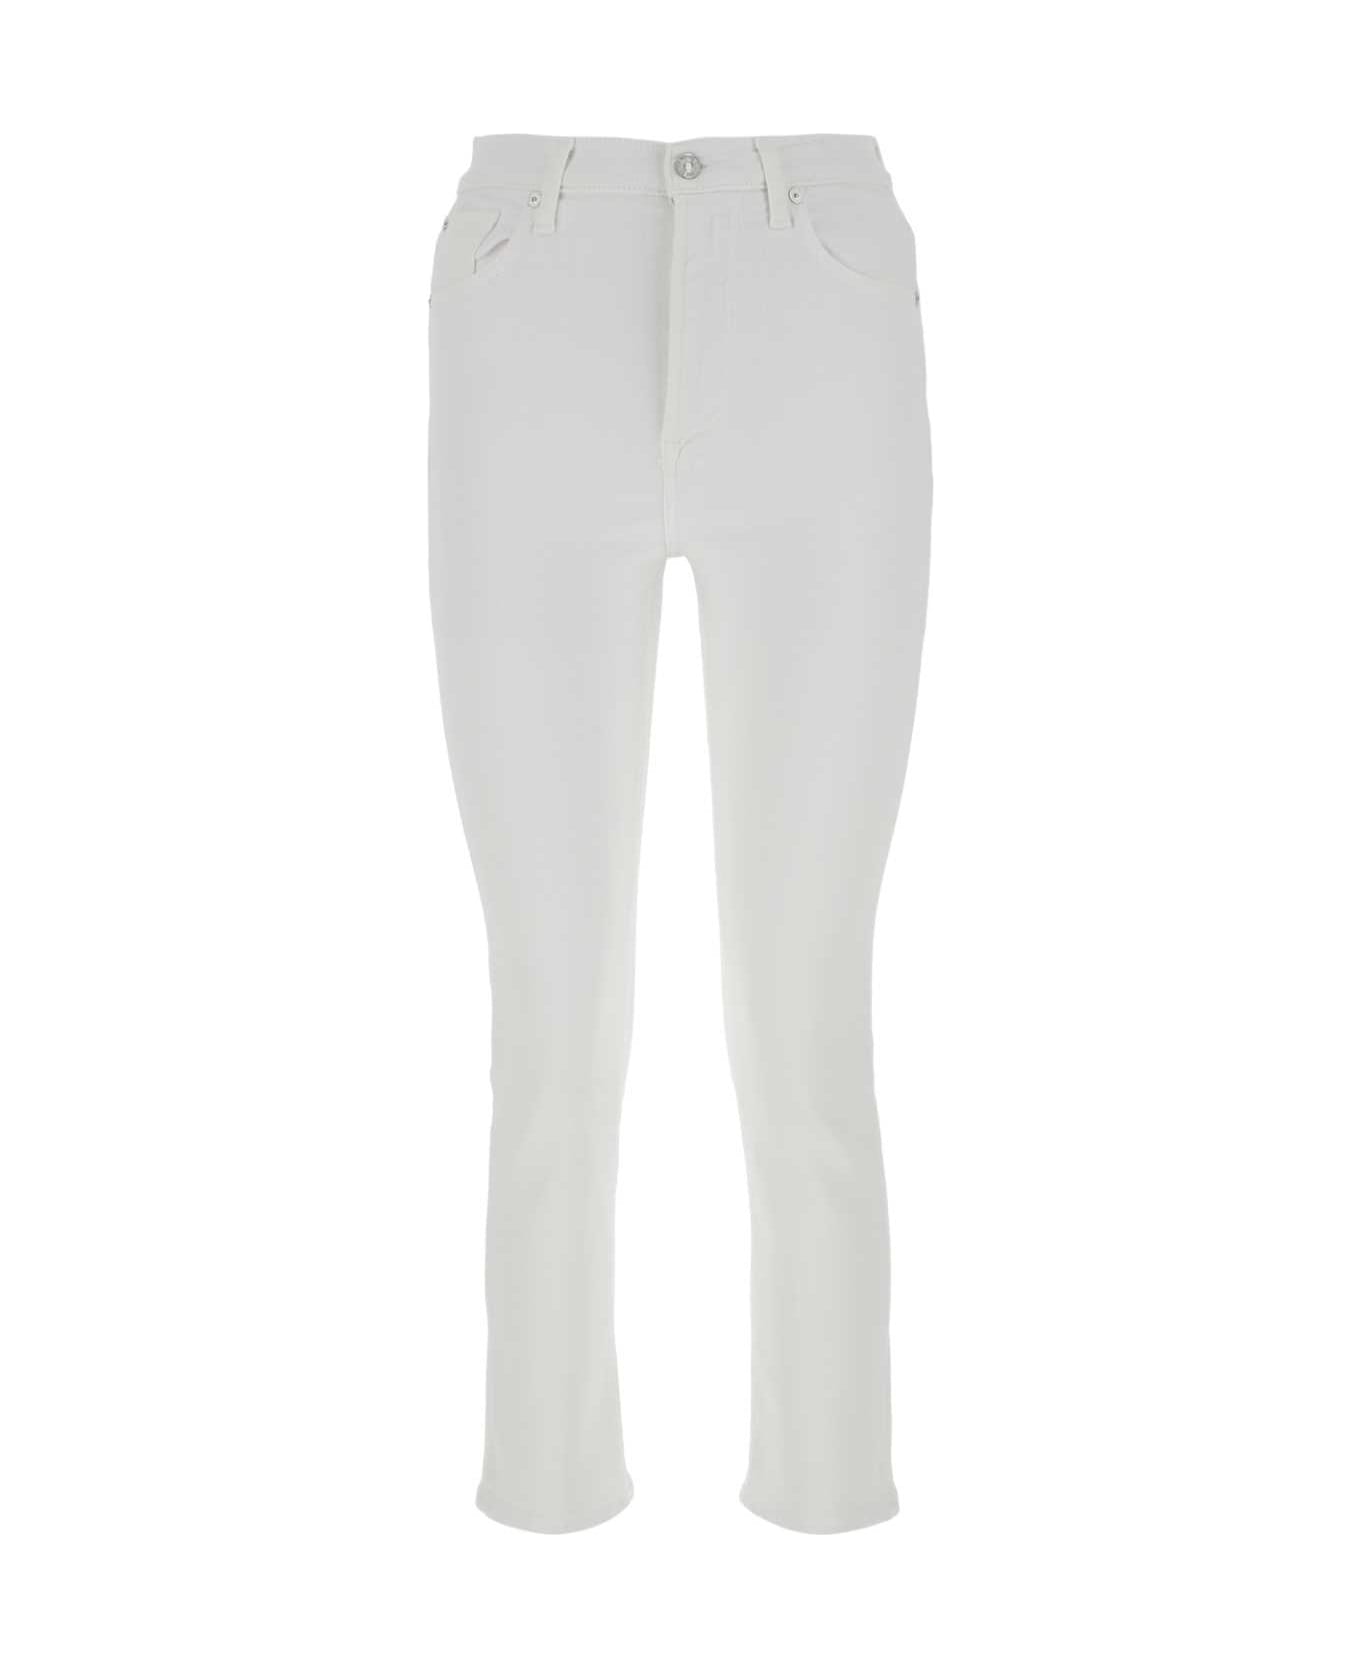 7 For All Mankind White Stretch Cotton Blend Luxe Vintage Jeans - LUXVINWHI ボトムス